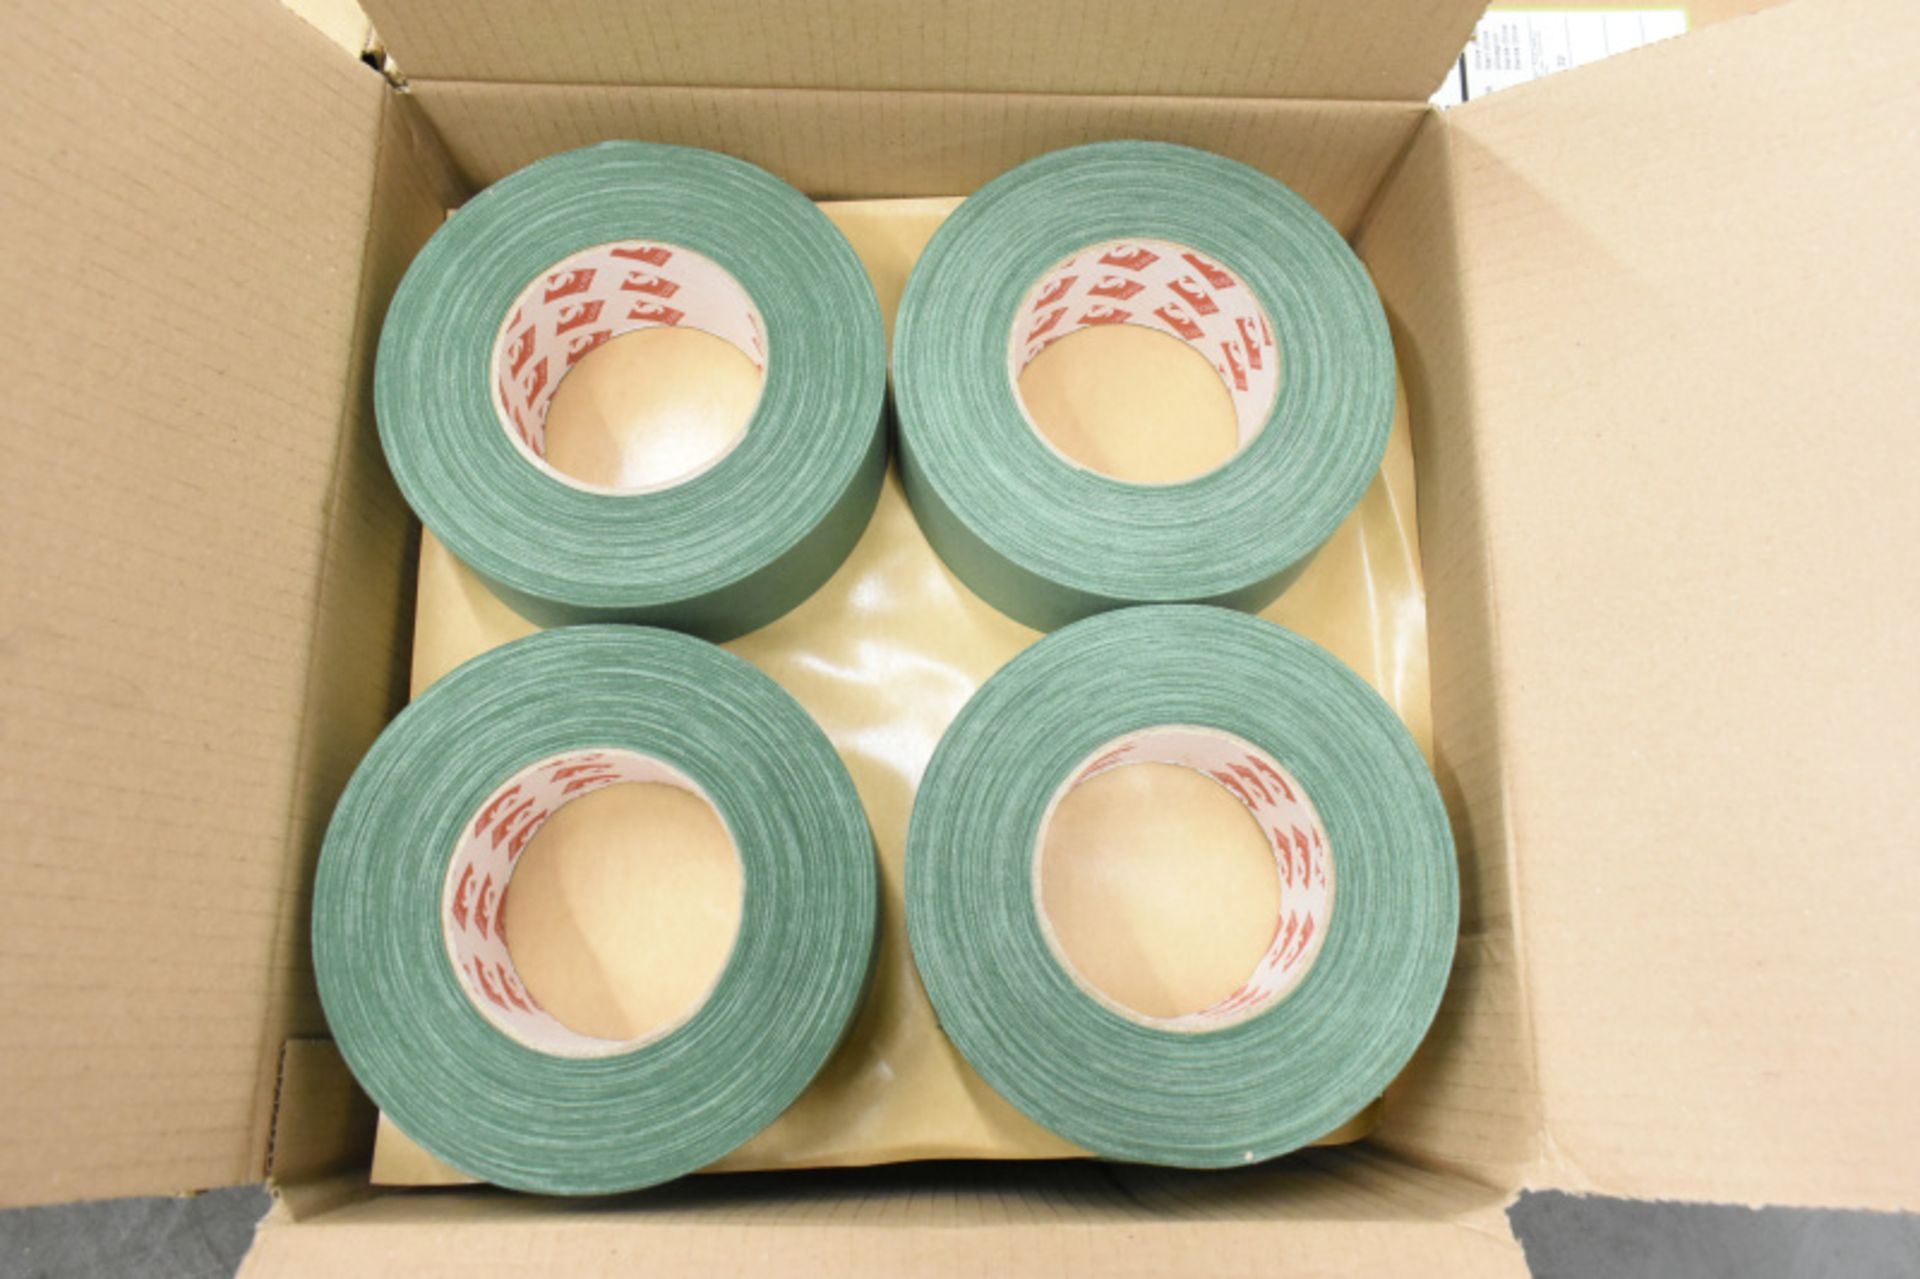 Scapa 3302 Pro Tape - Olive Green - 50mm x 50M rolls - 16 rolls per box - 2 boxes - manufactured 03/ - Image 2 of 4